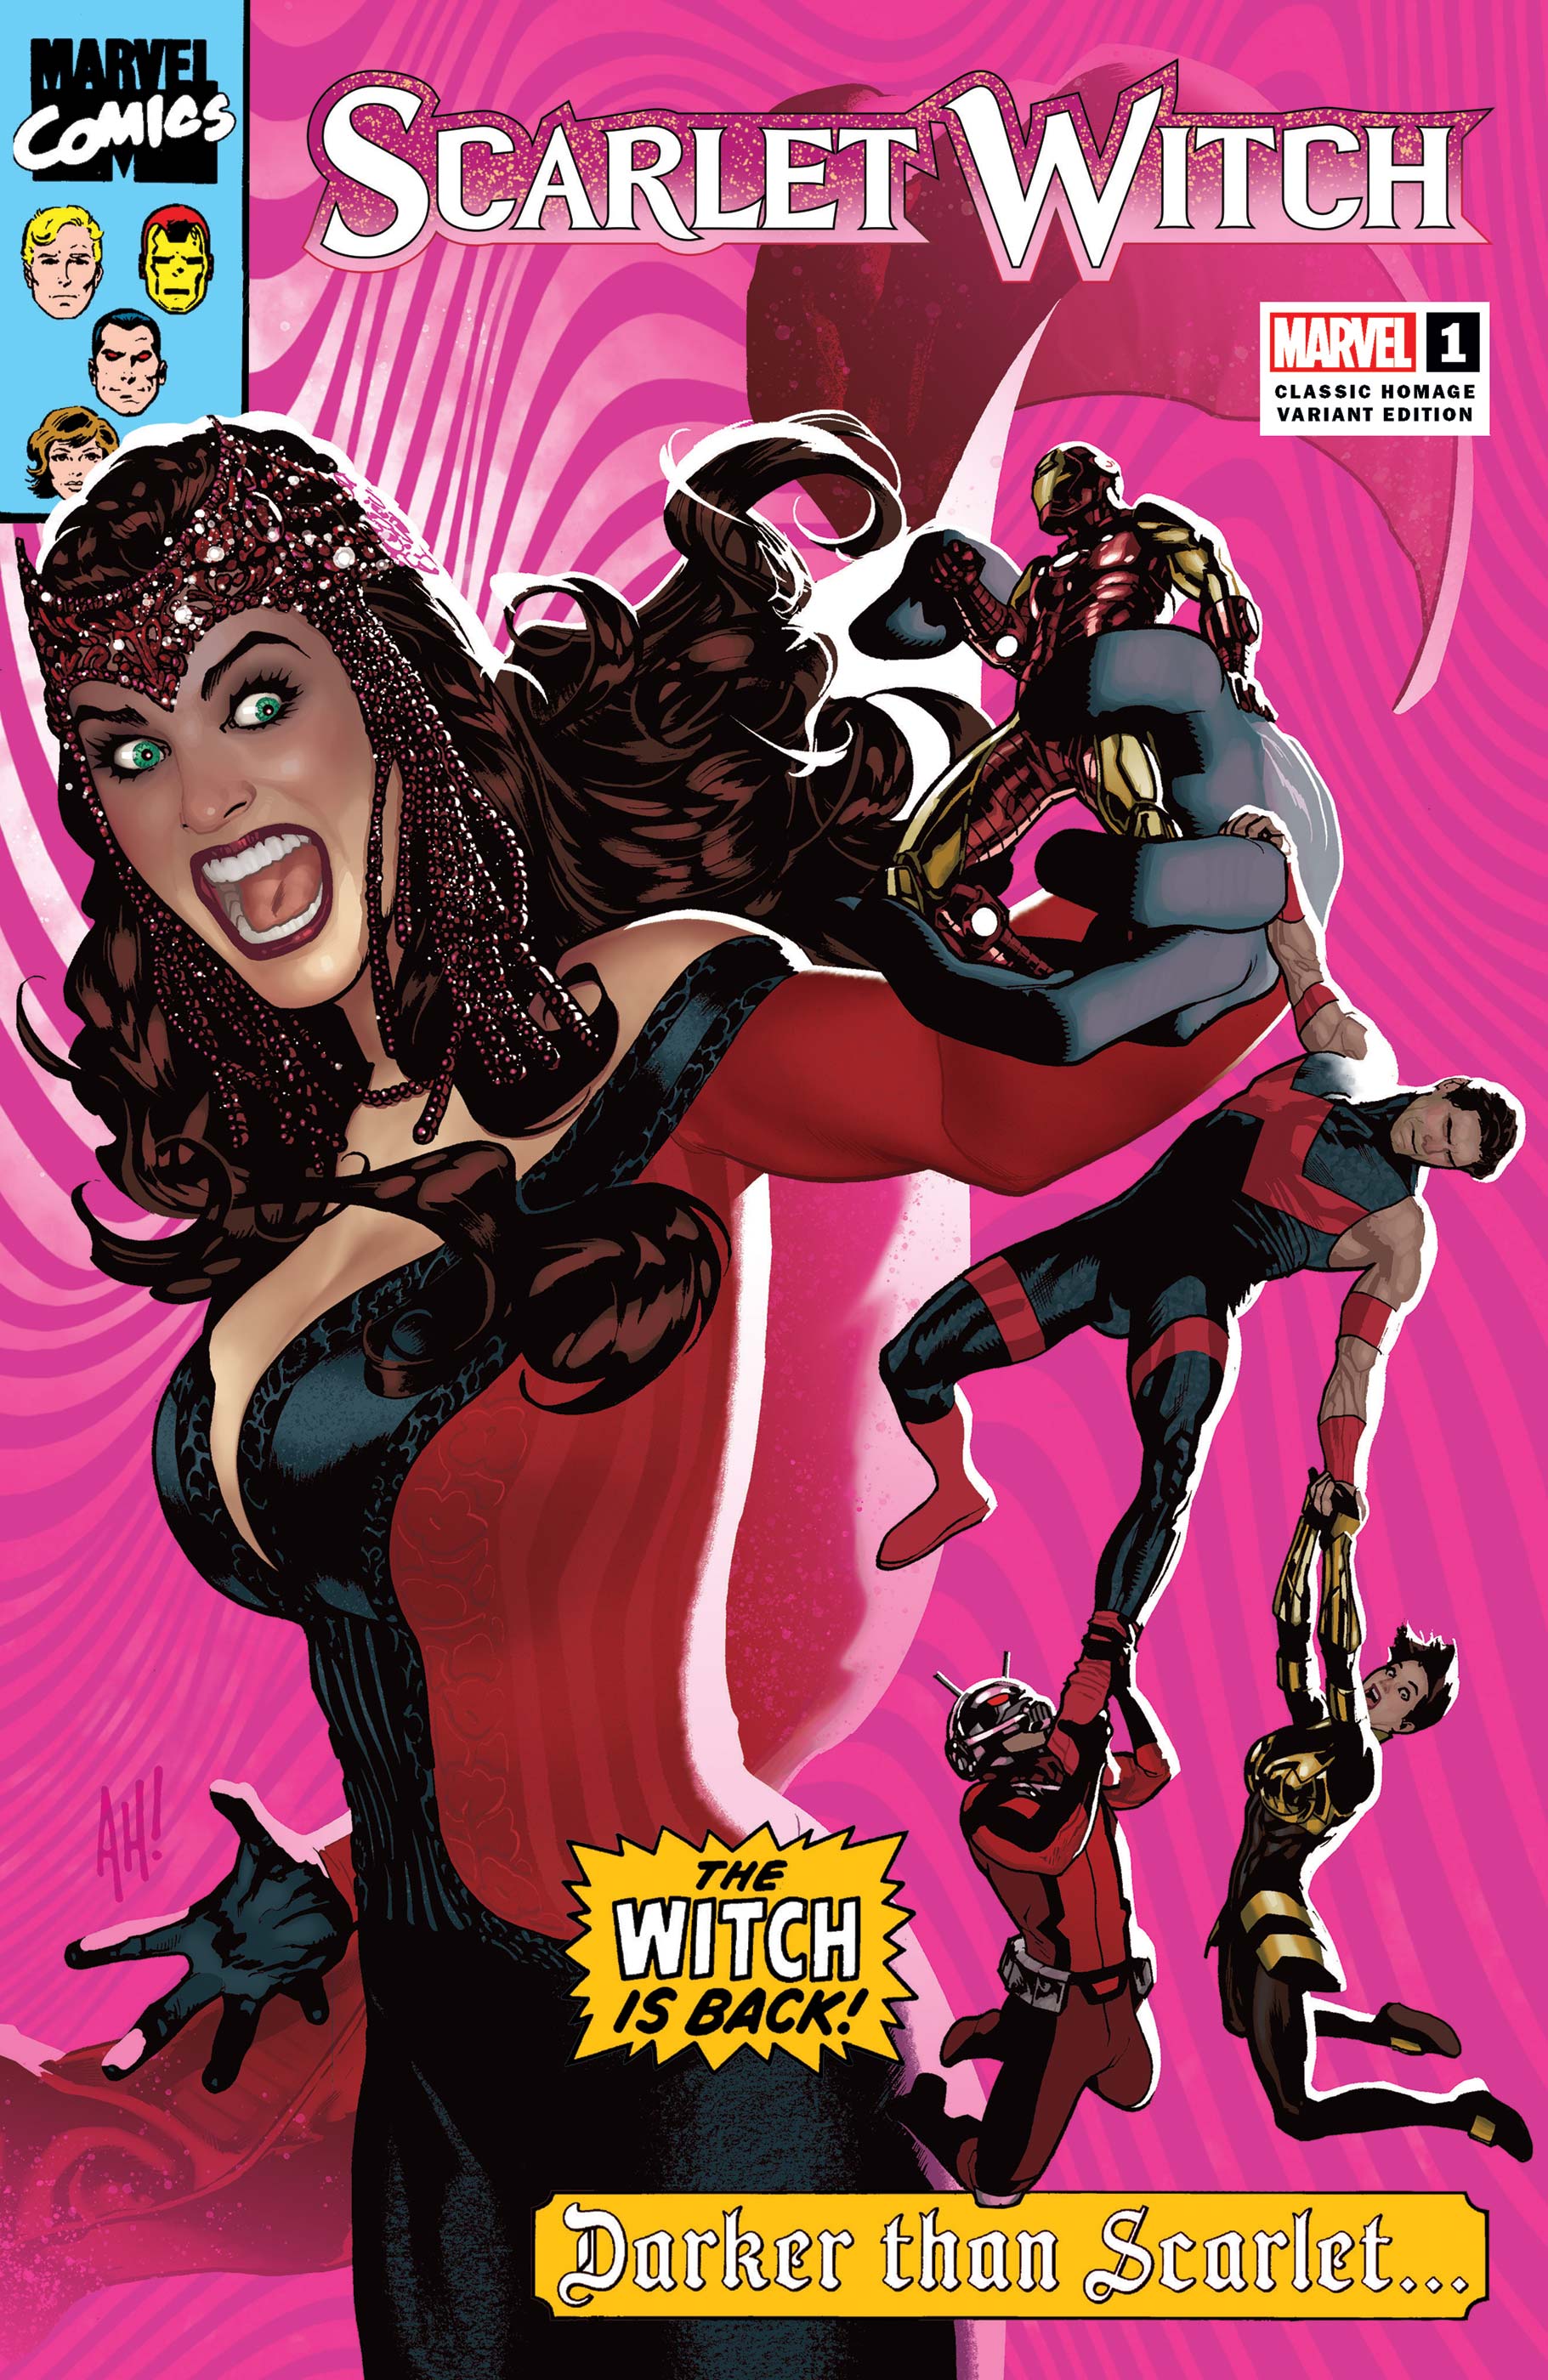 Scarlet Witch (2023) #1 (Variant)